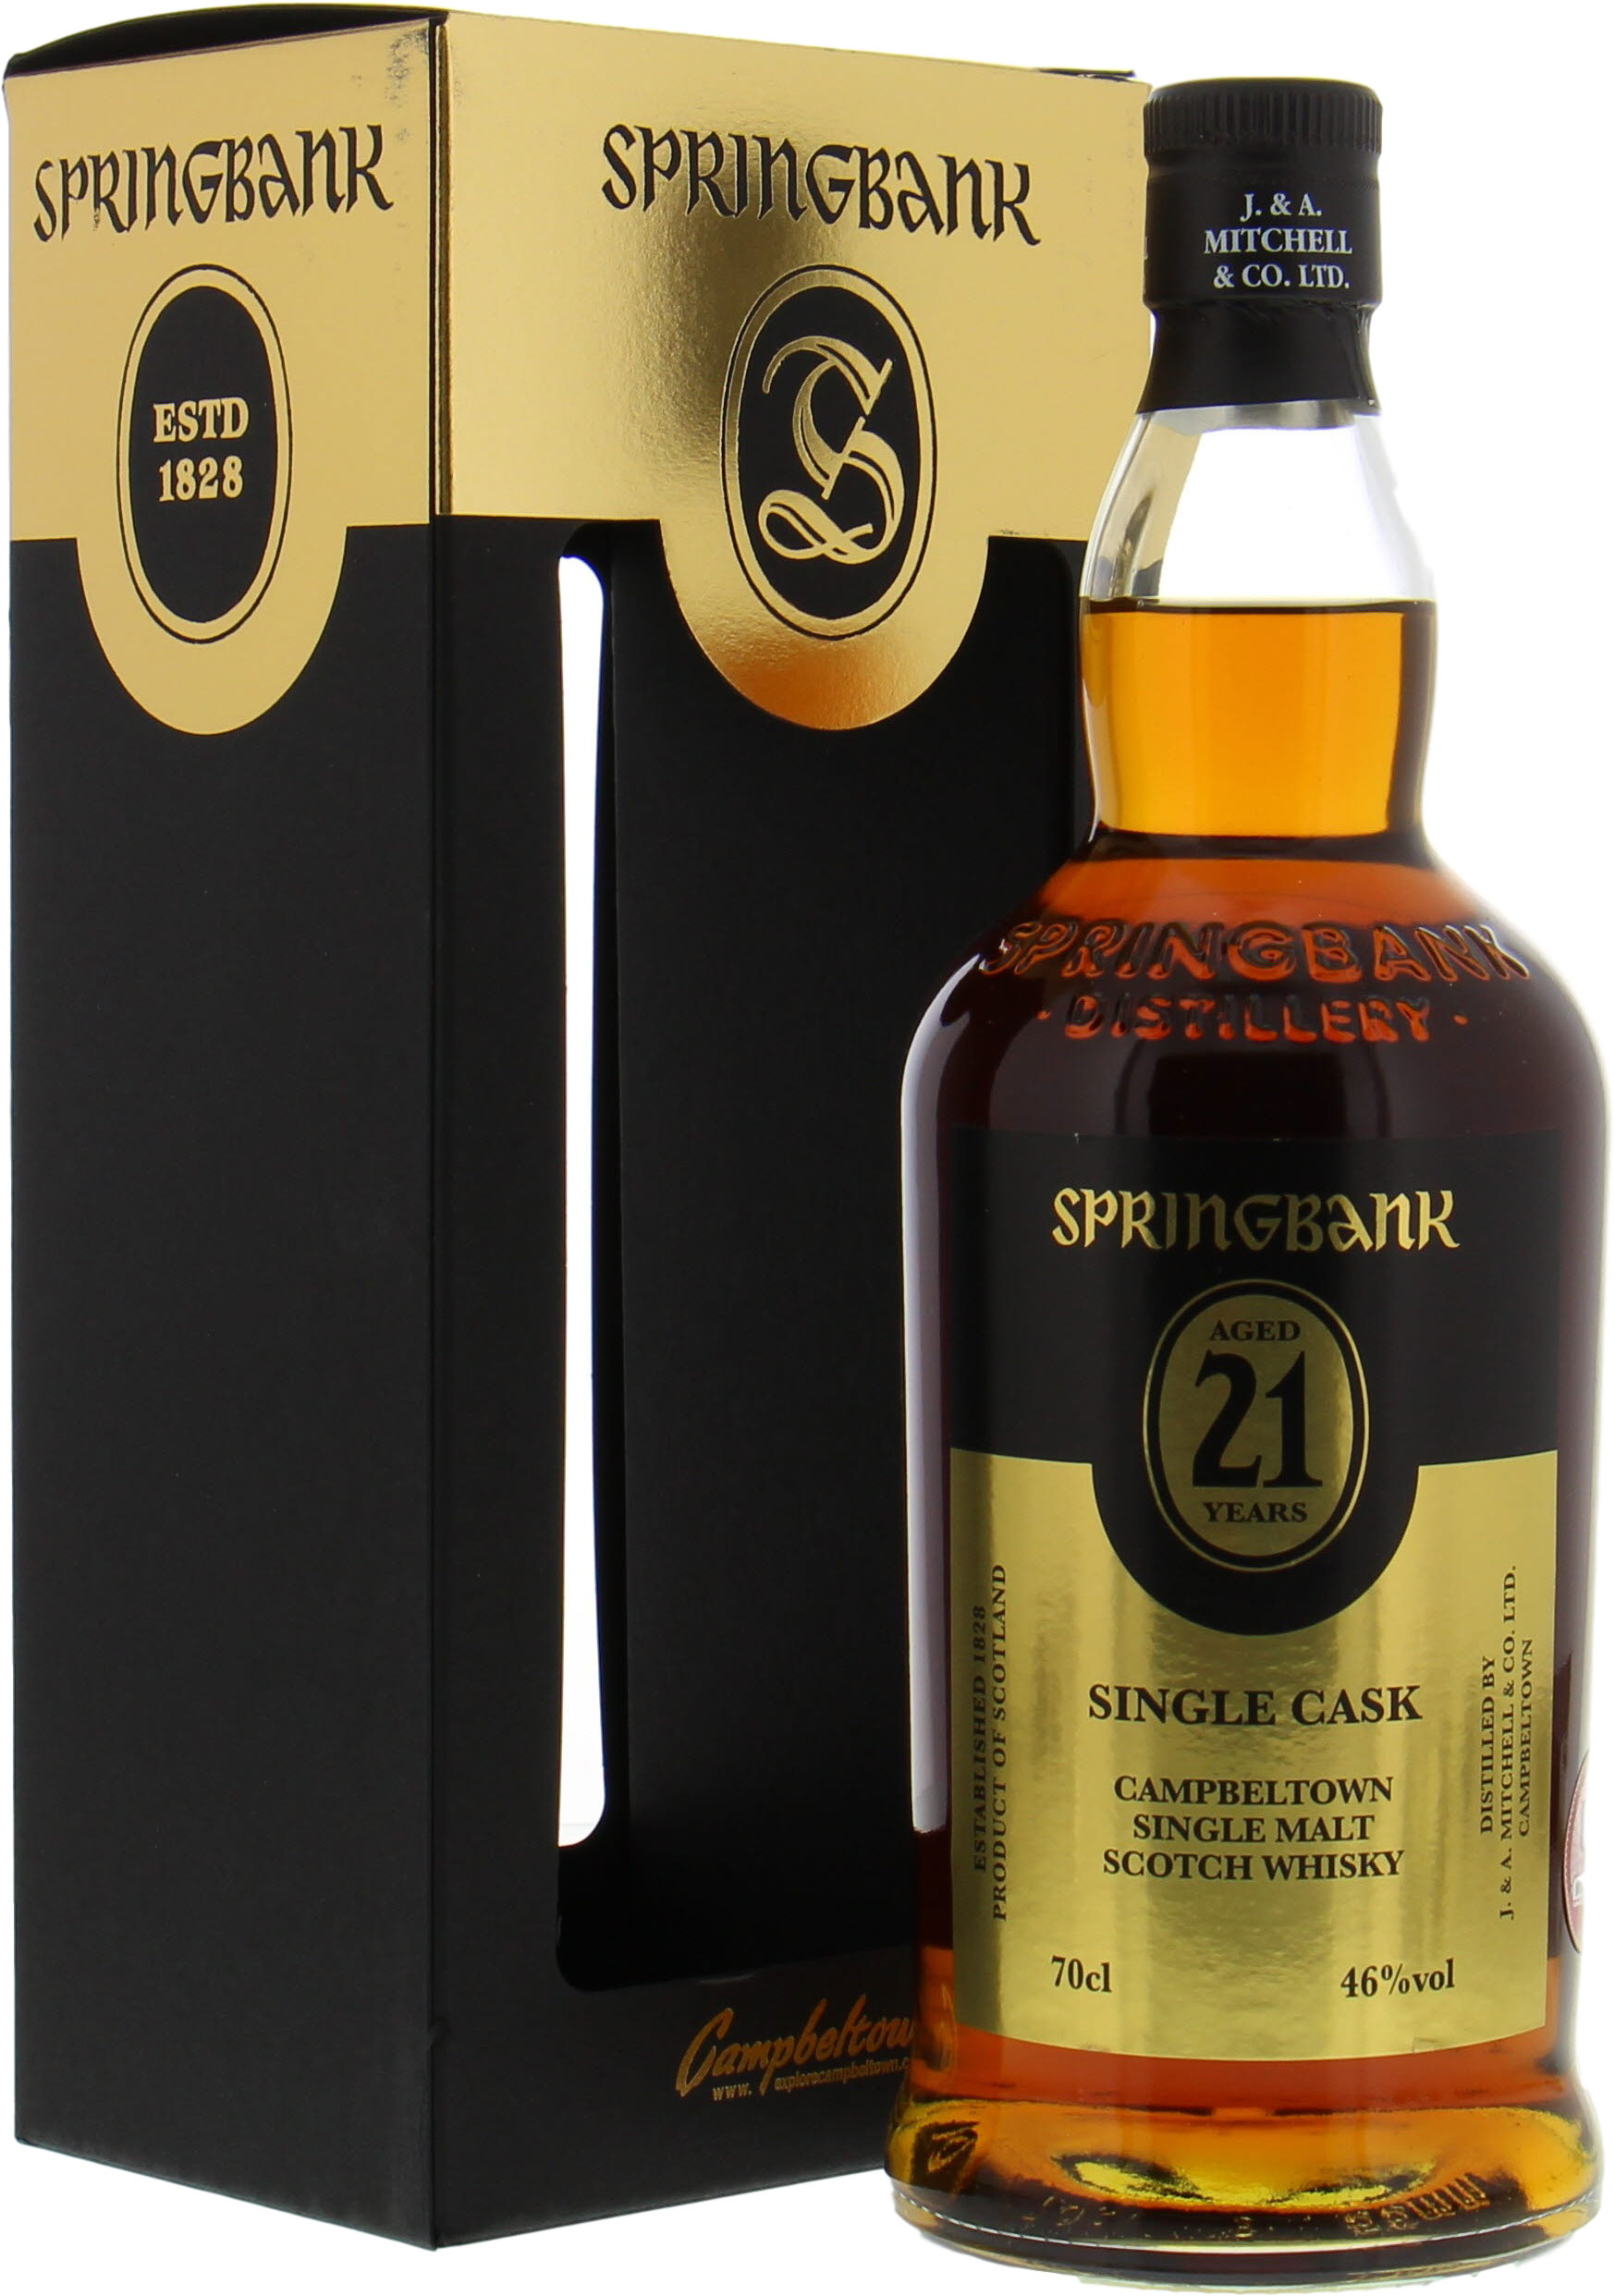 Springbank - Open Day 2018 21 Years Old 46% NV In Original Container